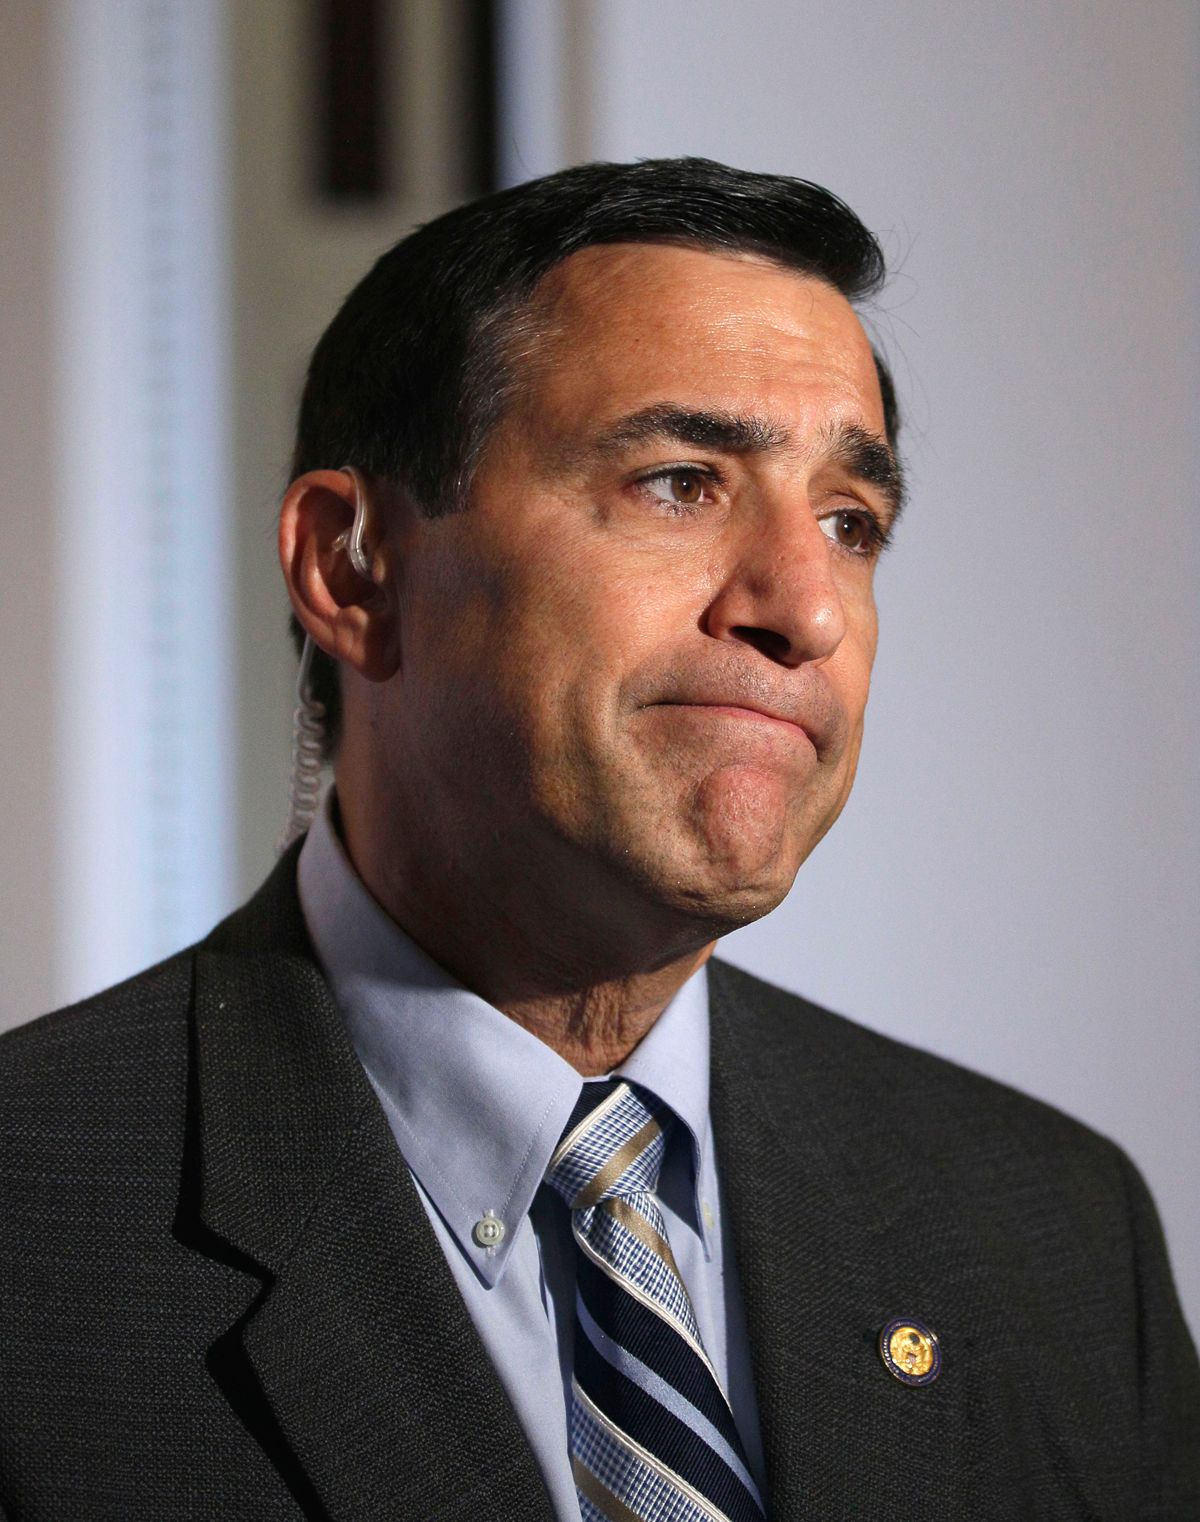 Rep. Darrell Issa, R-Calif. talks about Rep. Joe Sestak, D-Pa. during an interview on Capitol Hill in Washington Friday, May 28, 2010. 